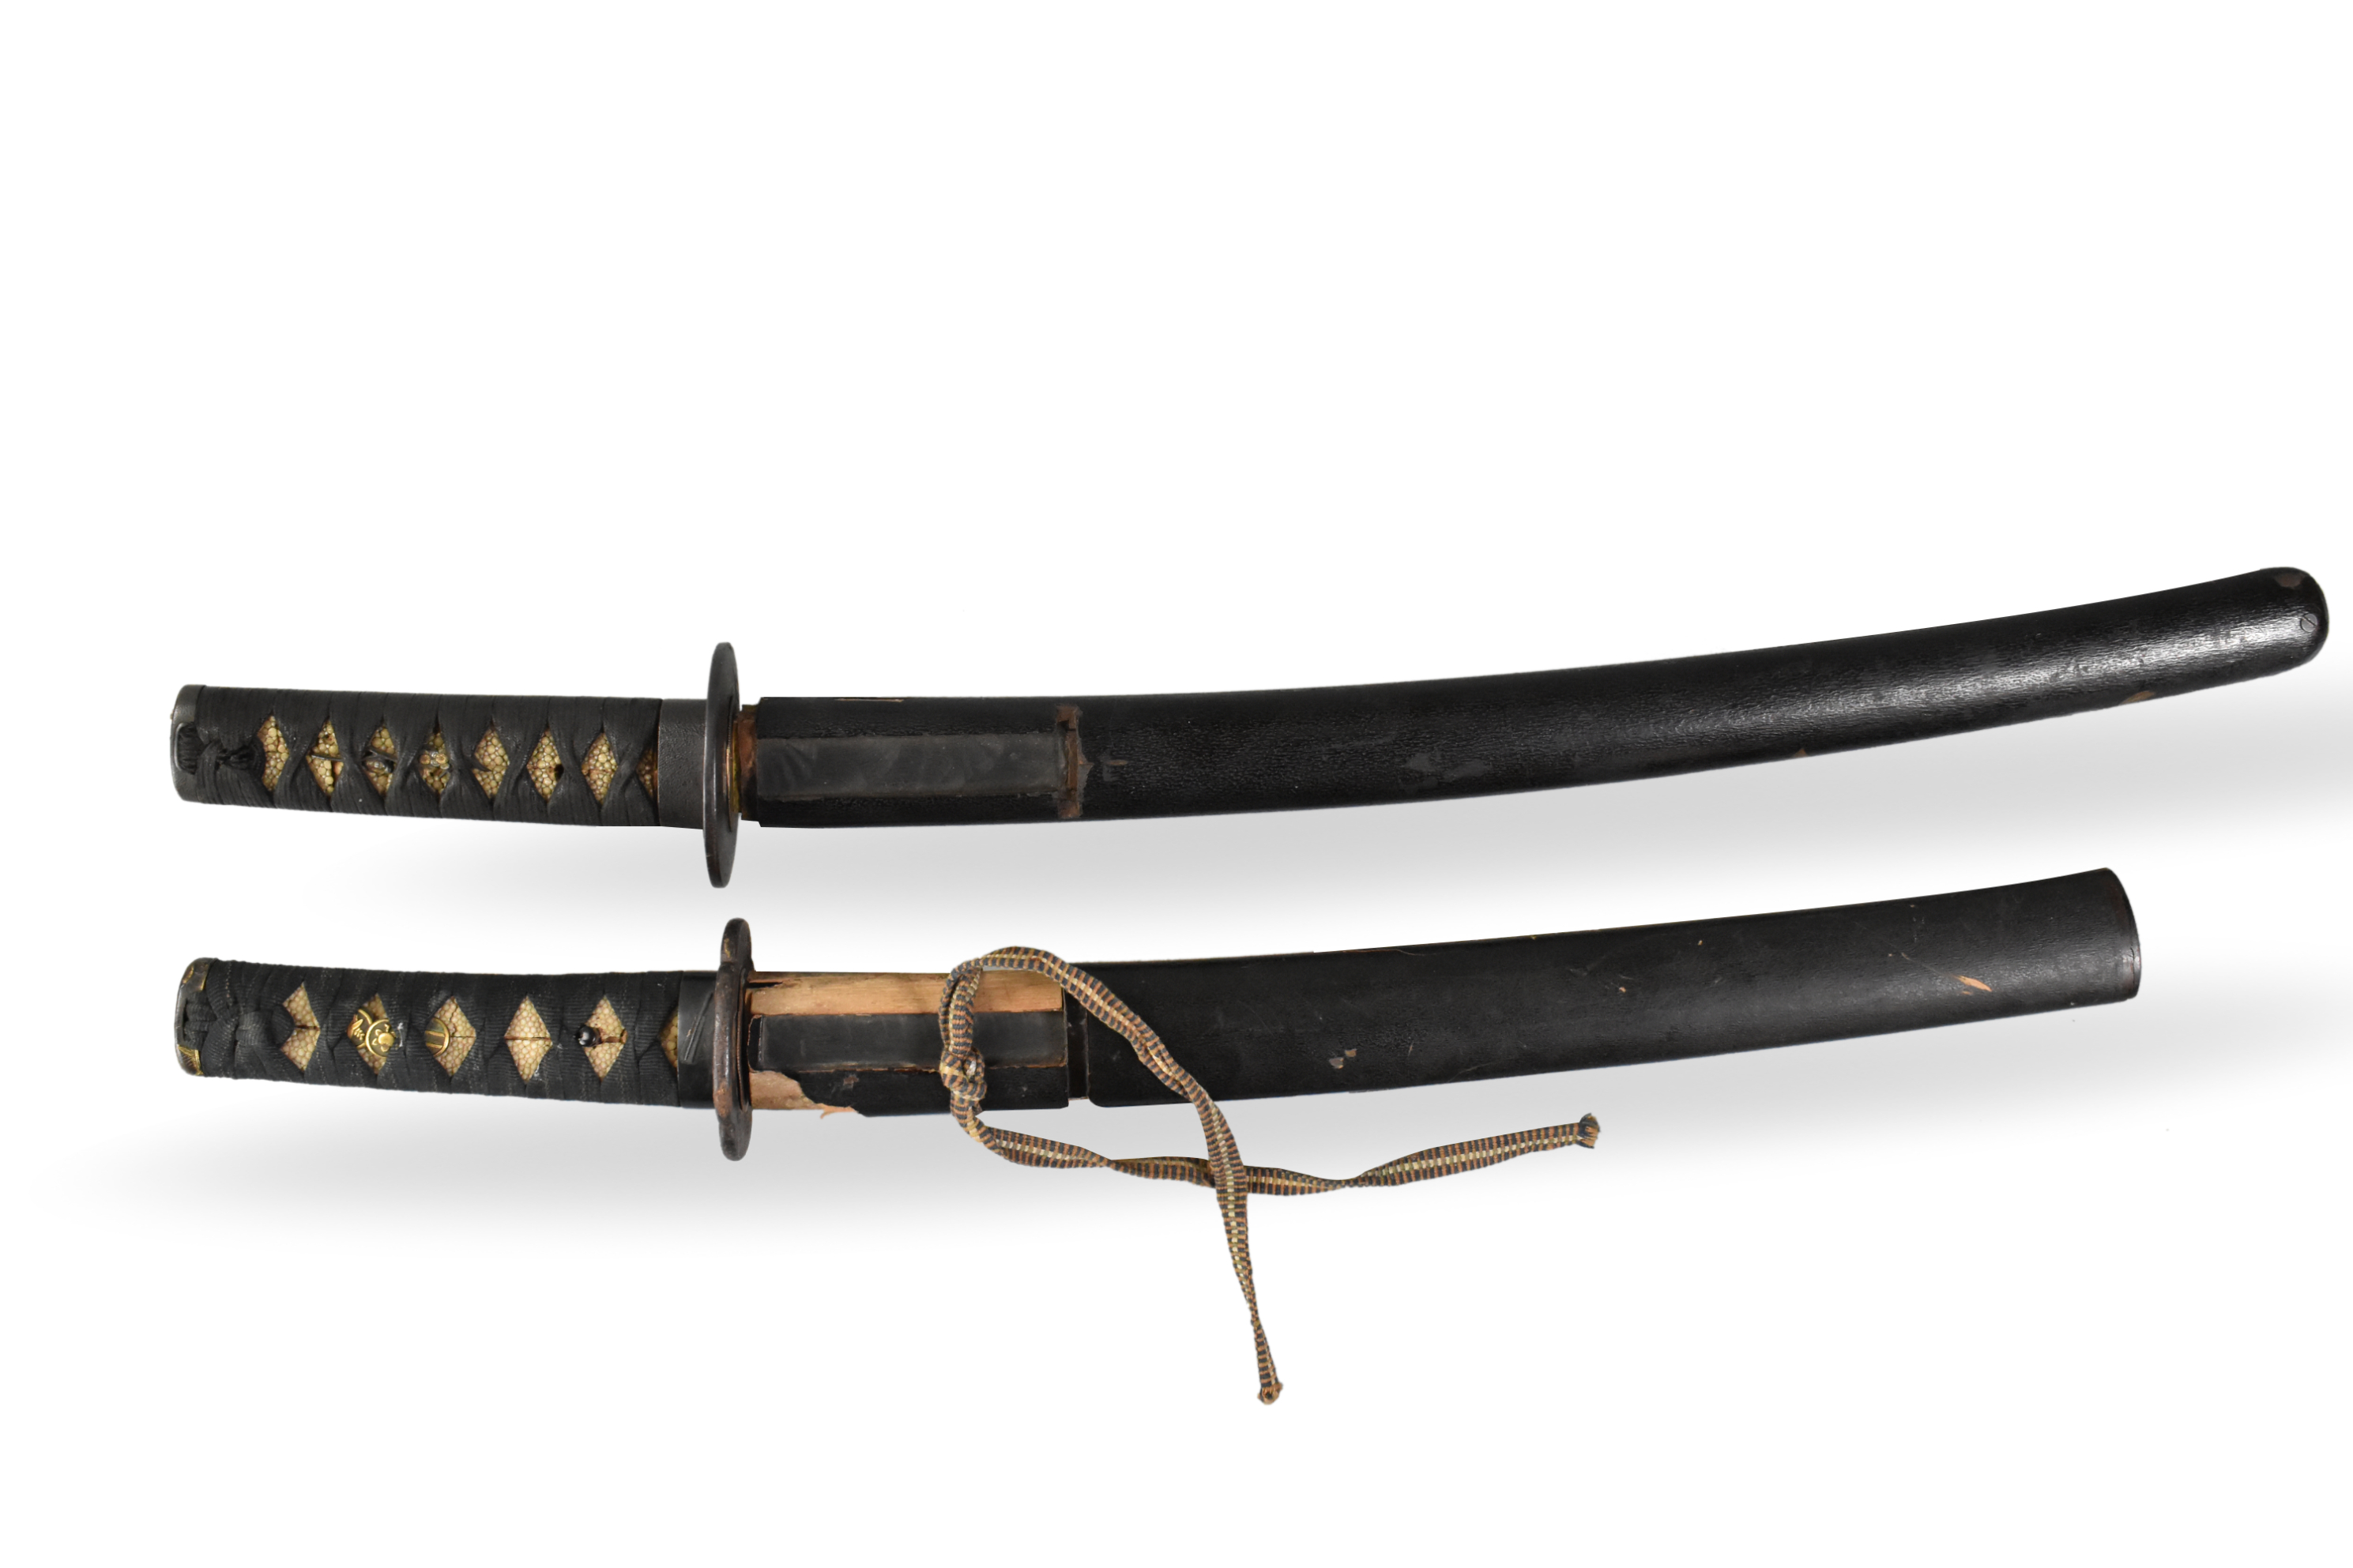 TWO JAPANESE WAKIZASHI WITH A SIGNED 301d69